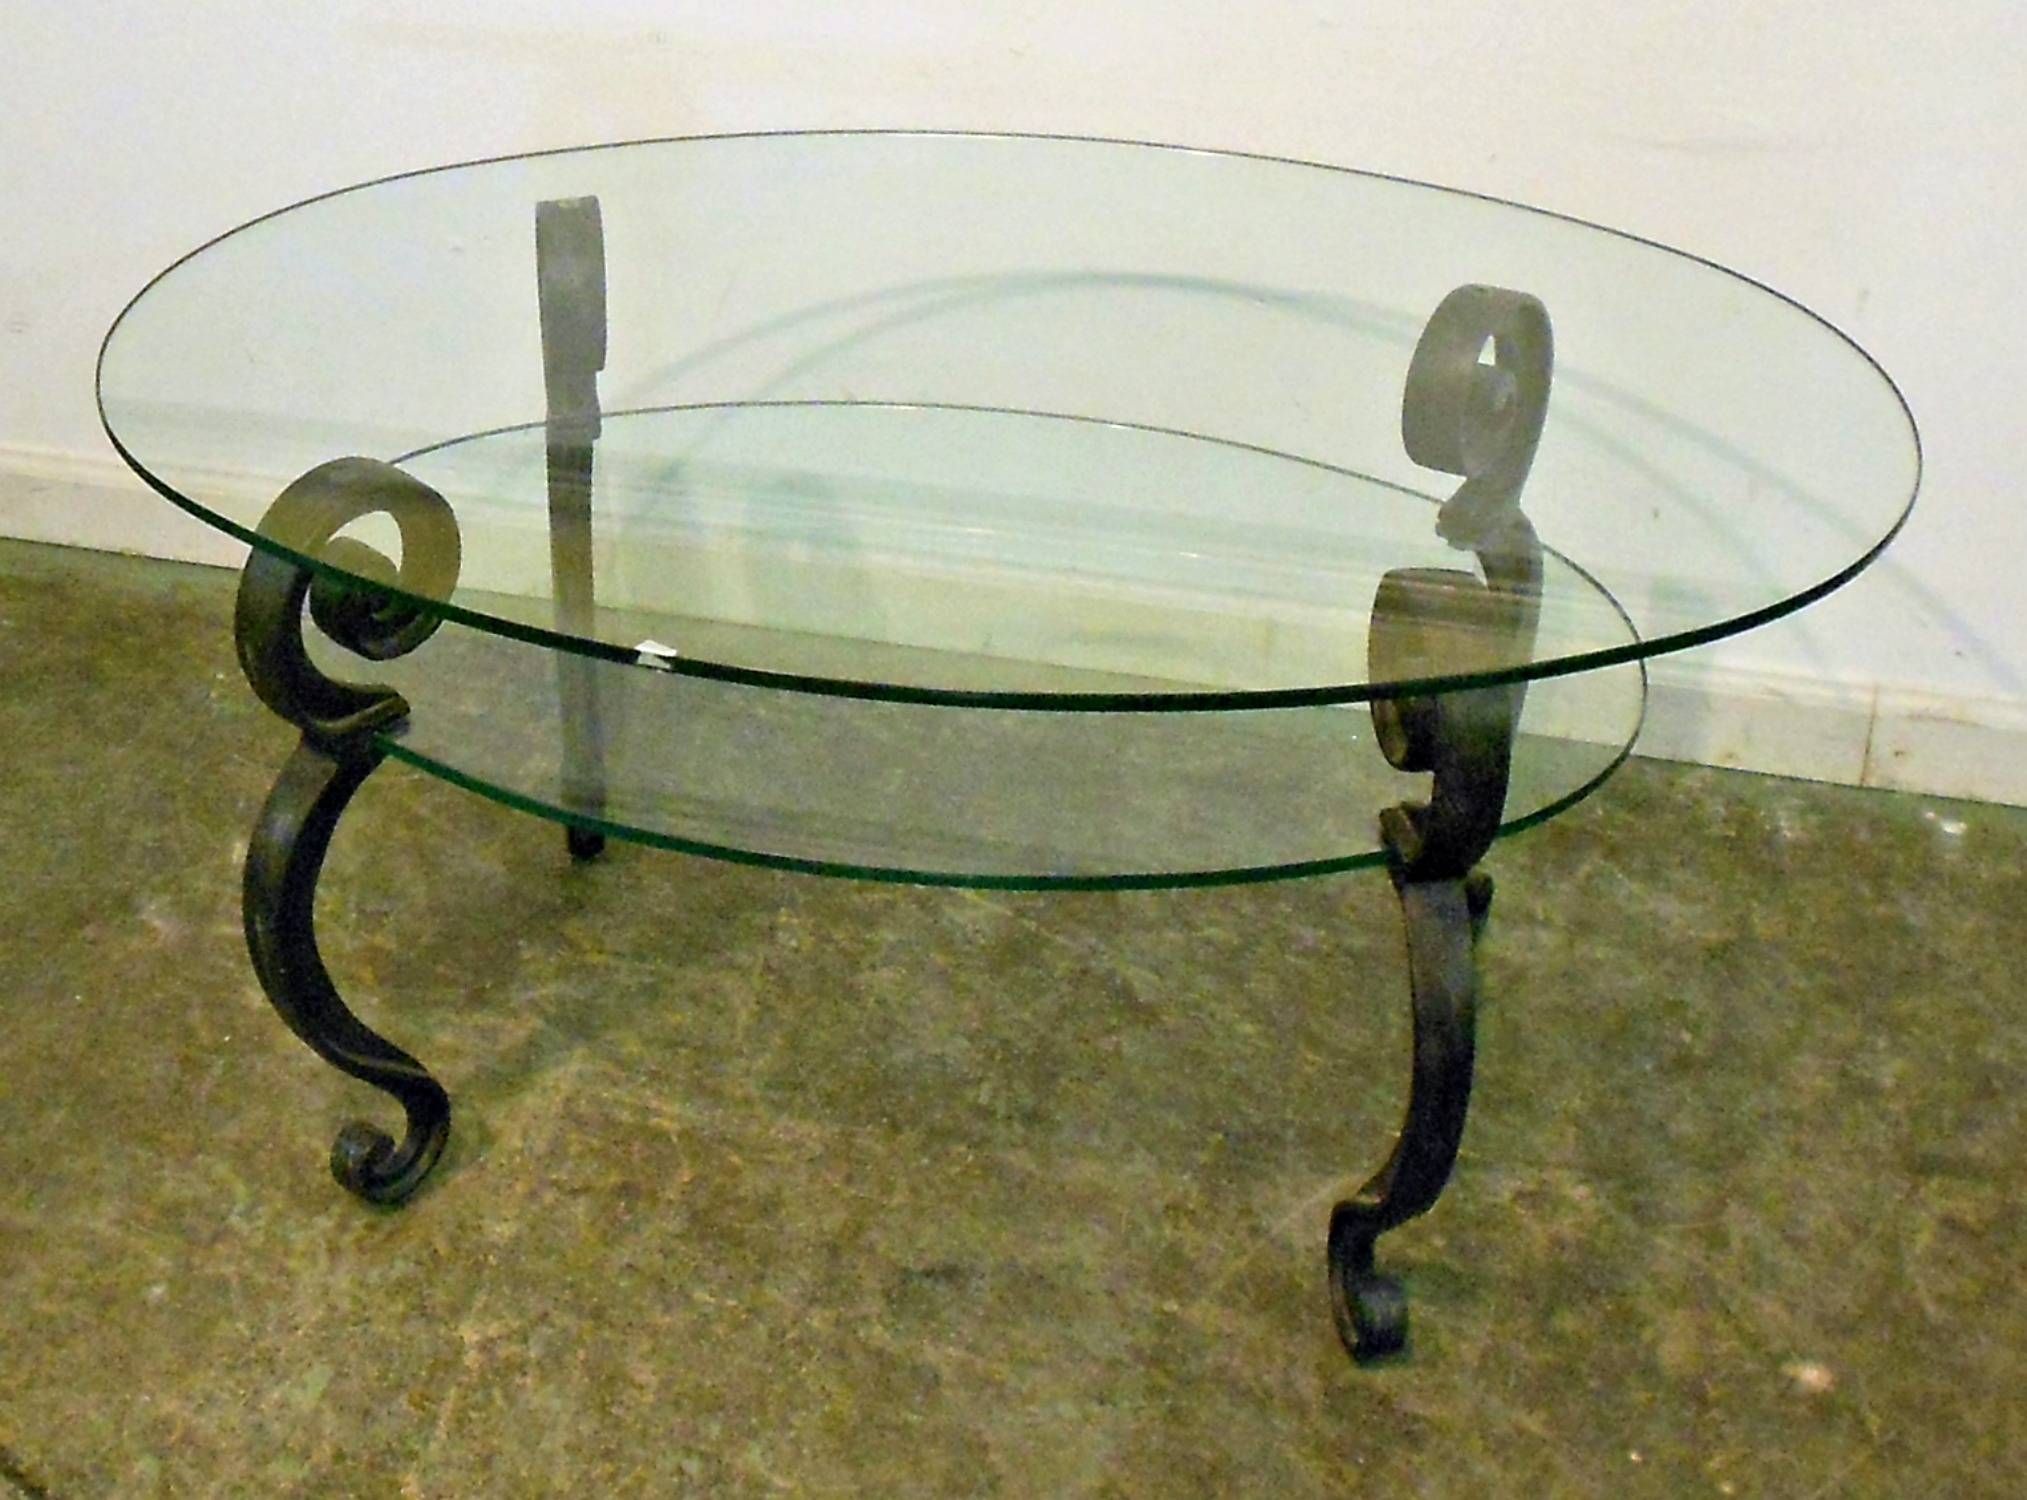 Vintage Glass Top Coffee Table With Black Metal Legs And Shelves With Vintage Glass Coffee Tables (View 4 of 30)